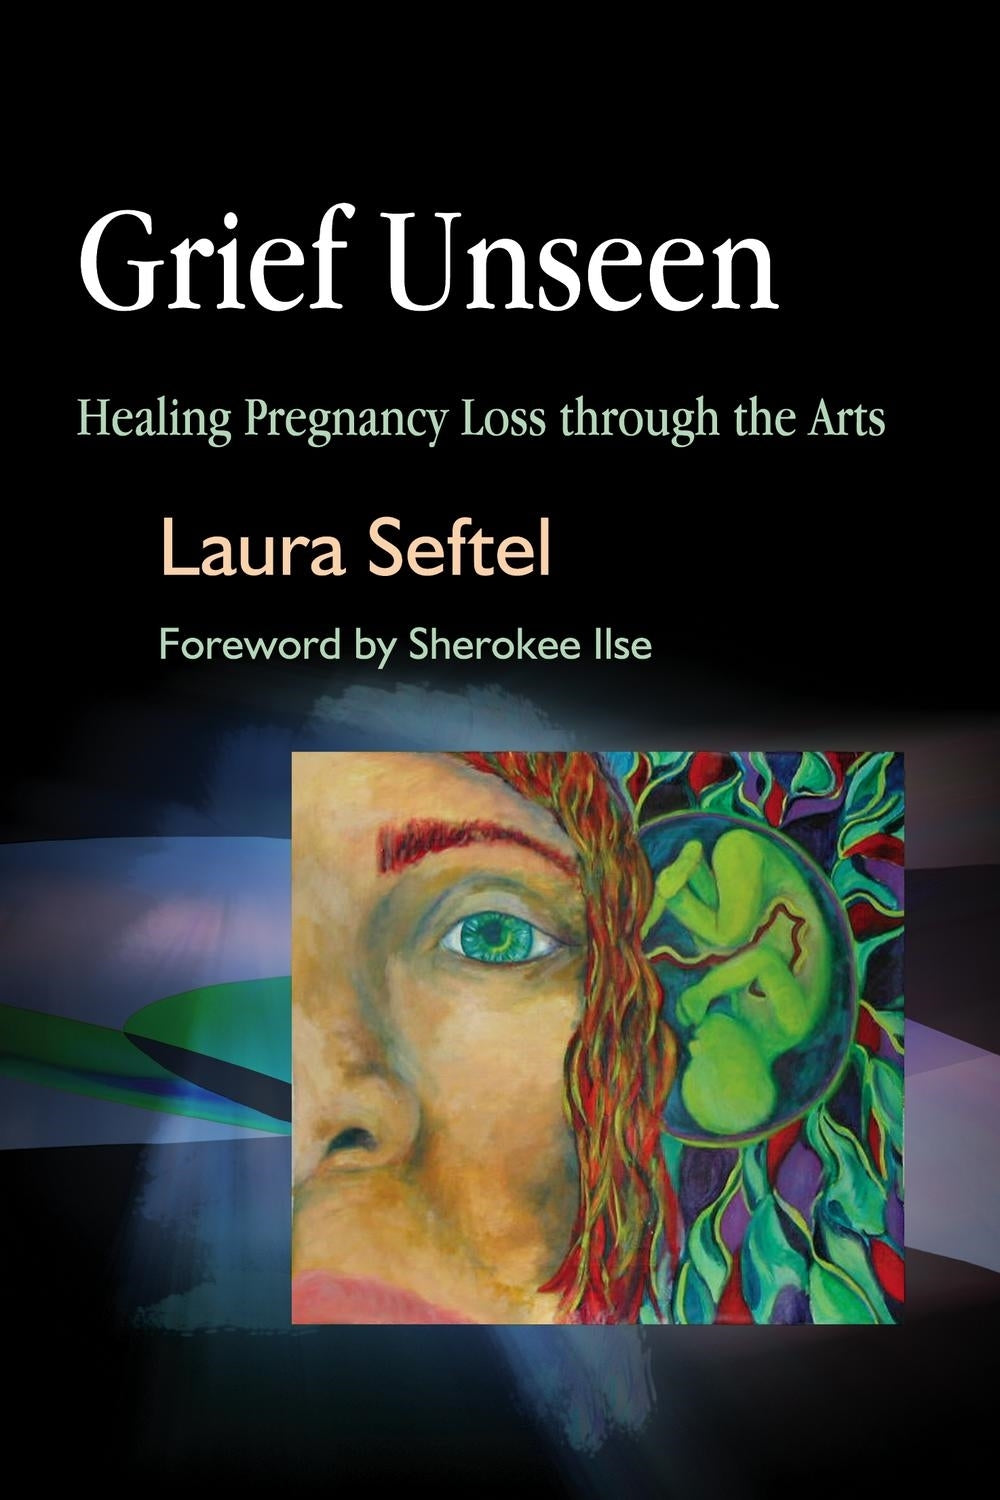 Grief Unseen by Laura Seftel